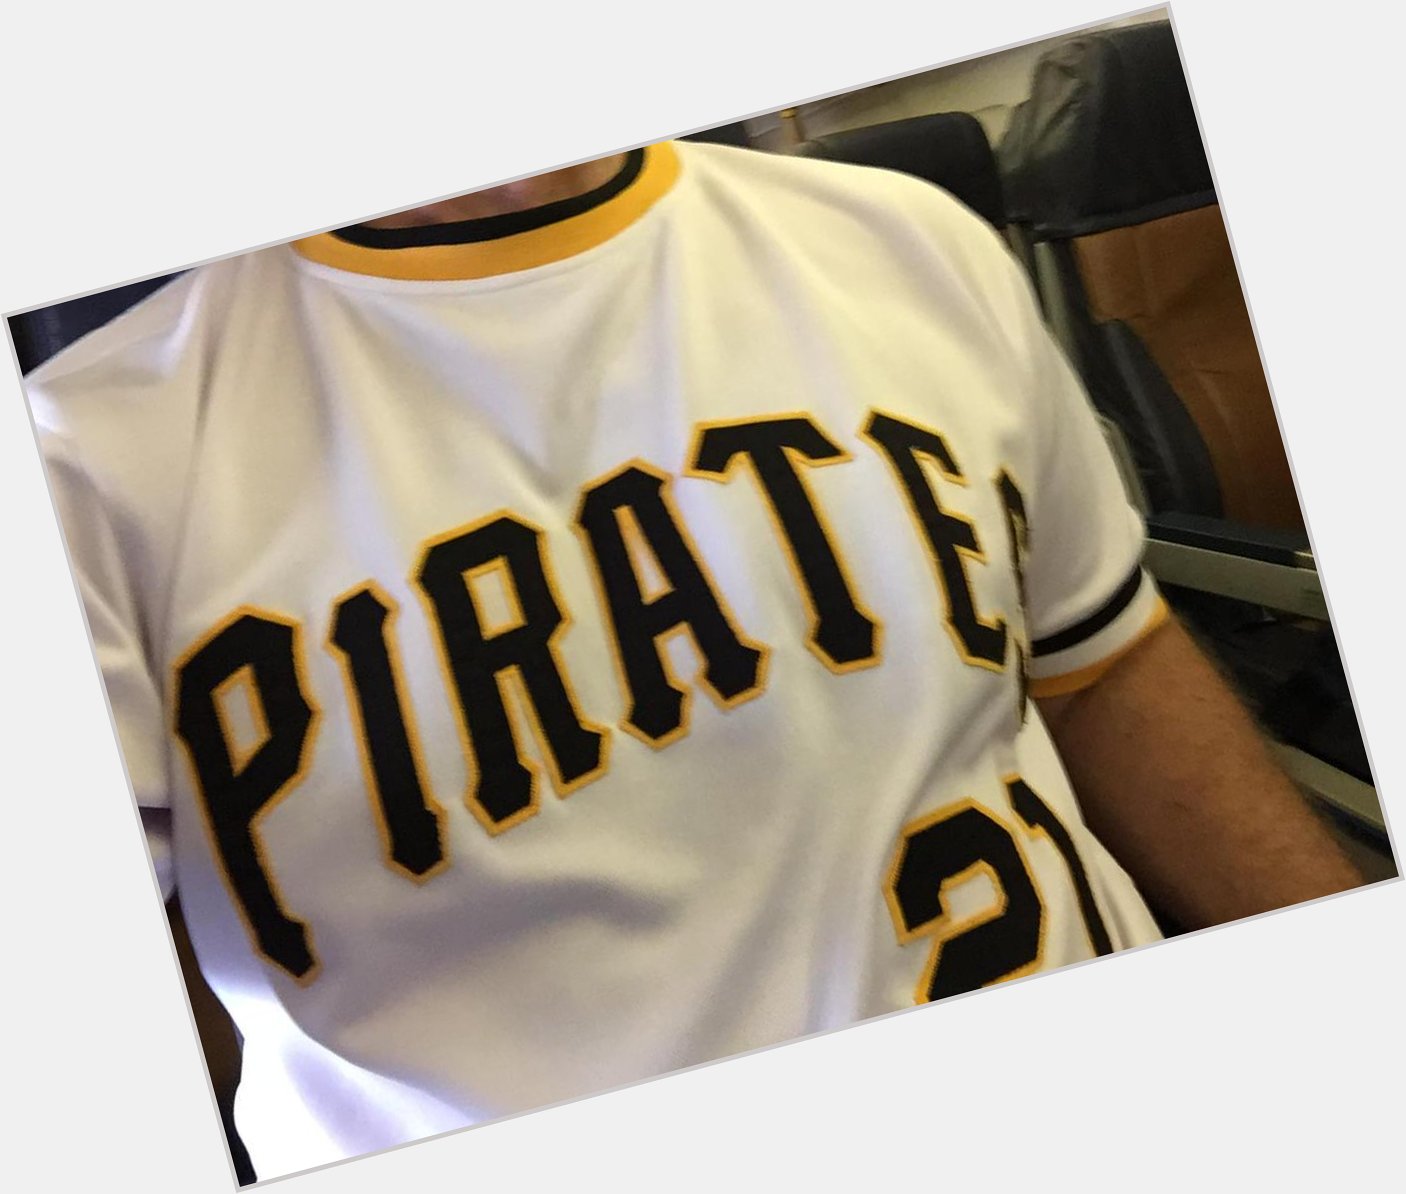 Wearing my Roberto Clemente jersey today in honor of my favorite player as a boy. birthday 